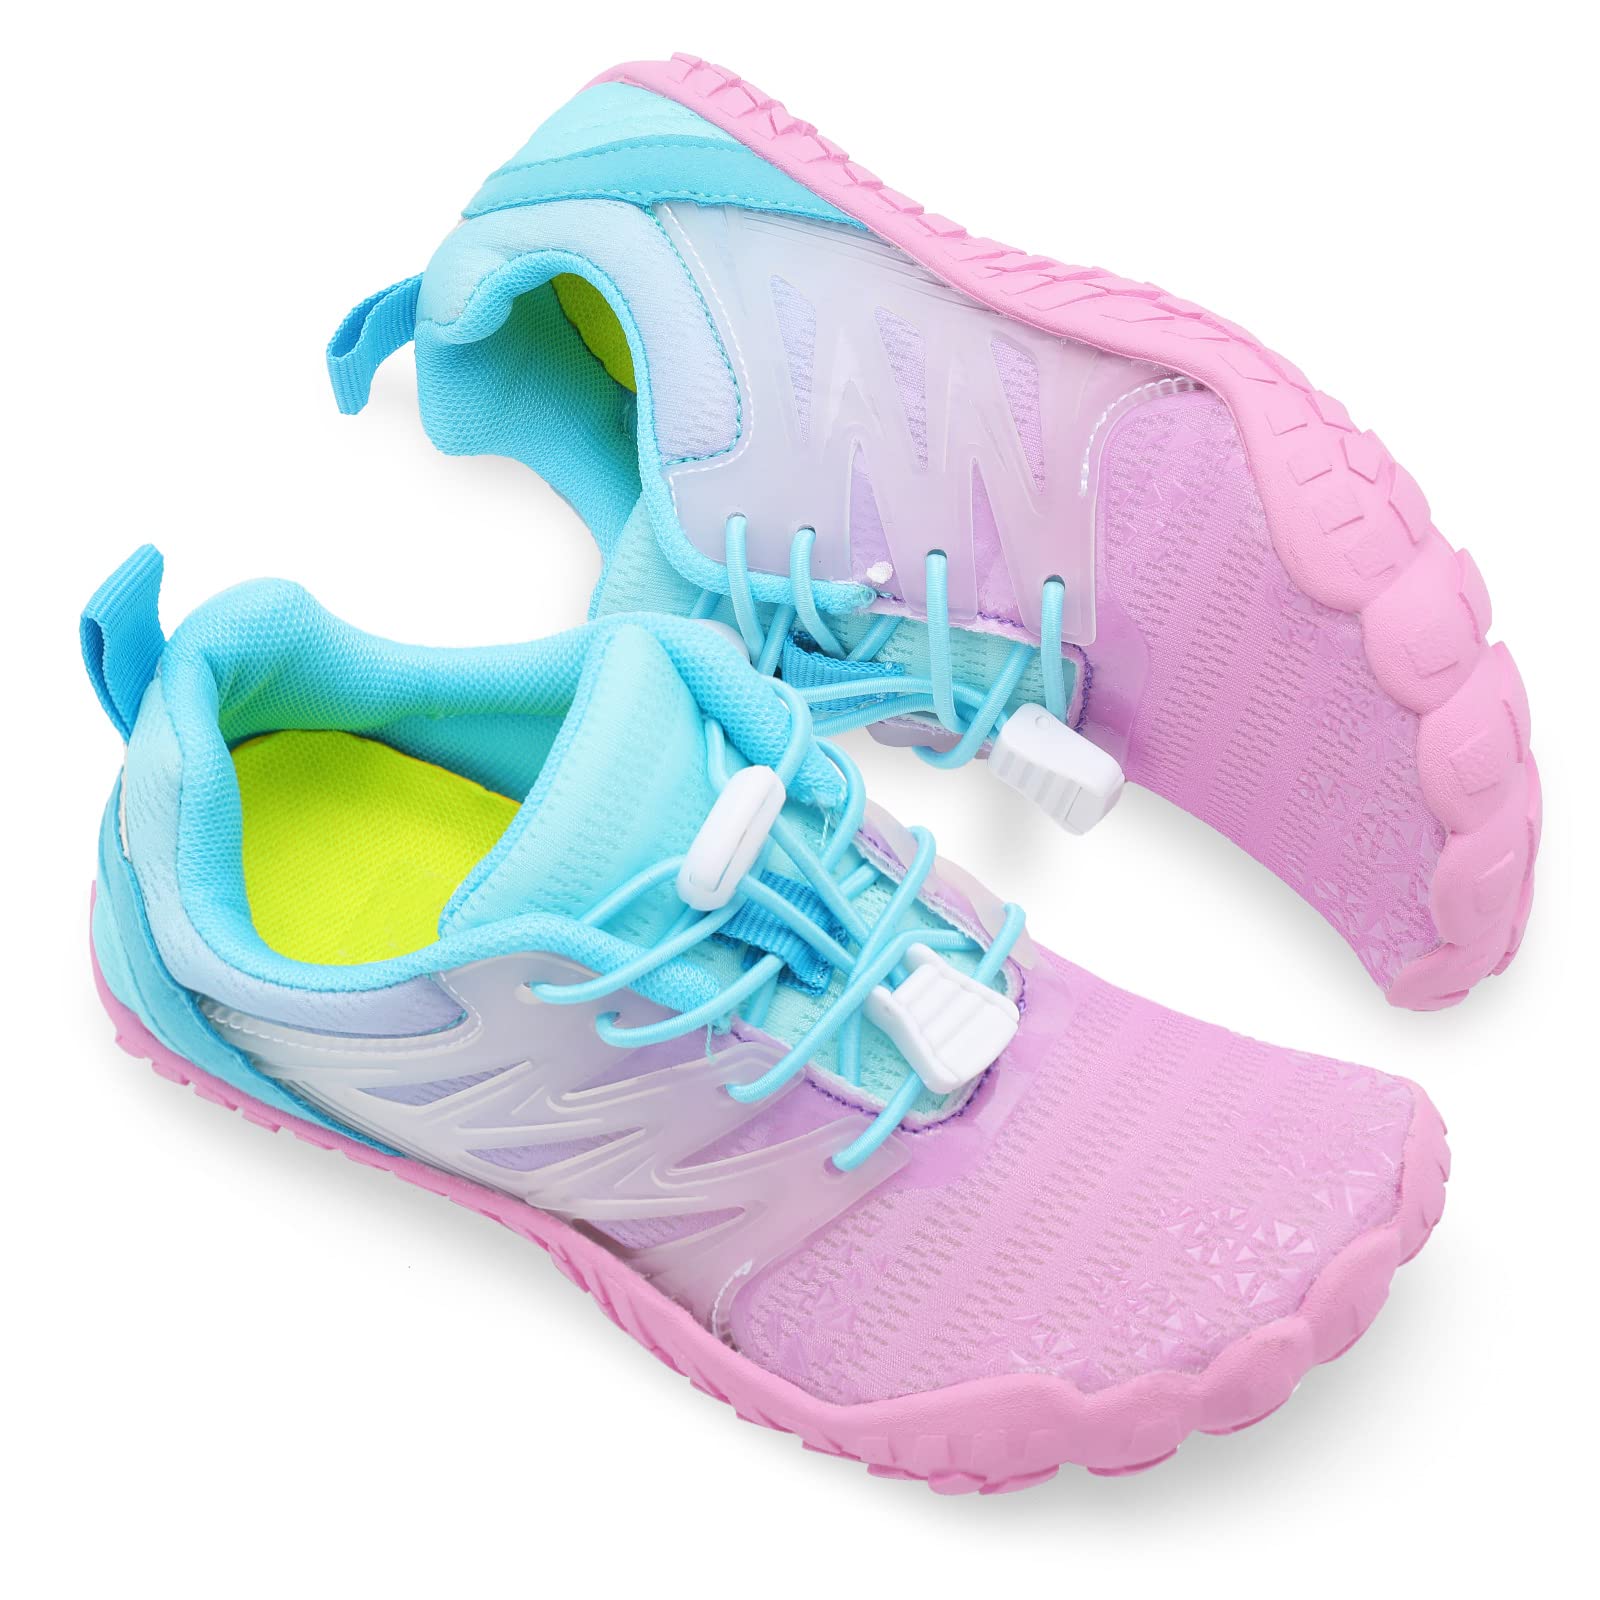 L-RUN Kids Water Shoes Boys Girls Water Hiking Shoes Indoor Outdoor Quick Dry Athletic Sneaker Shoes